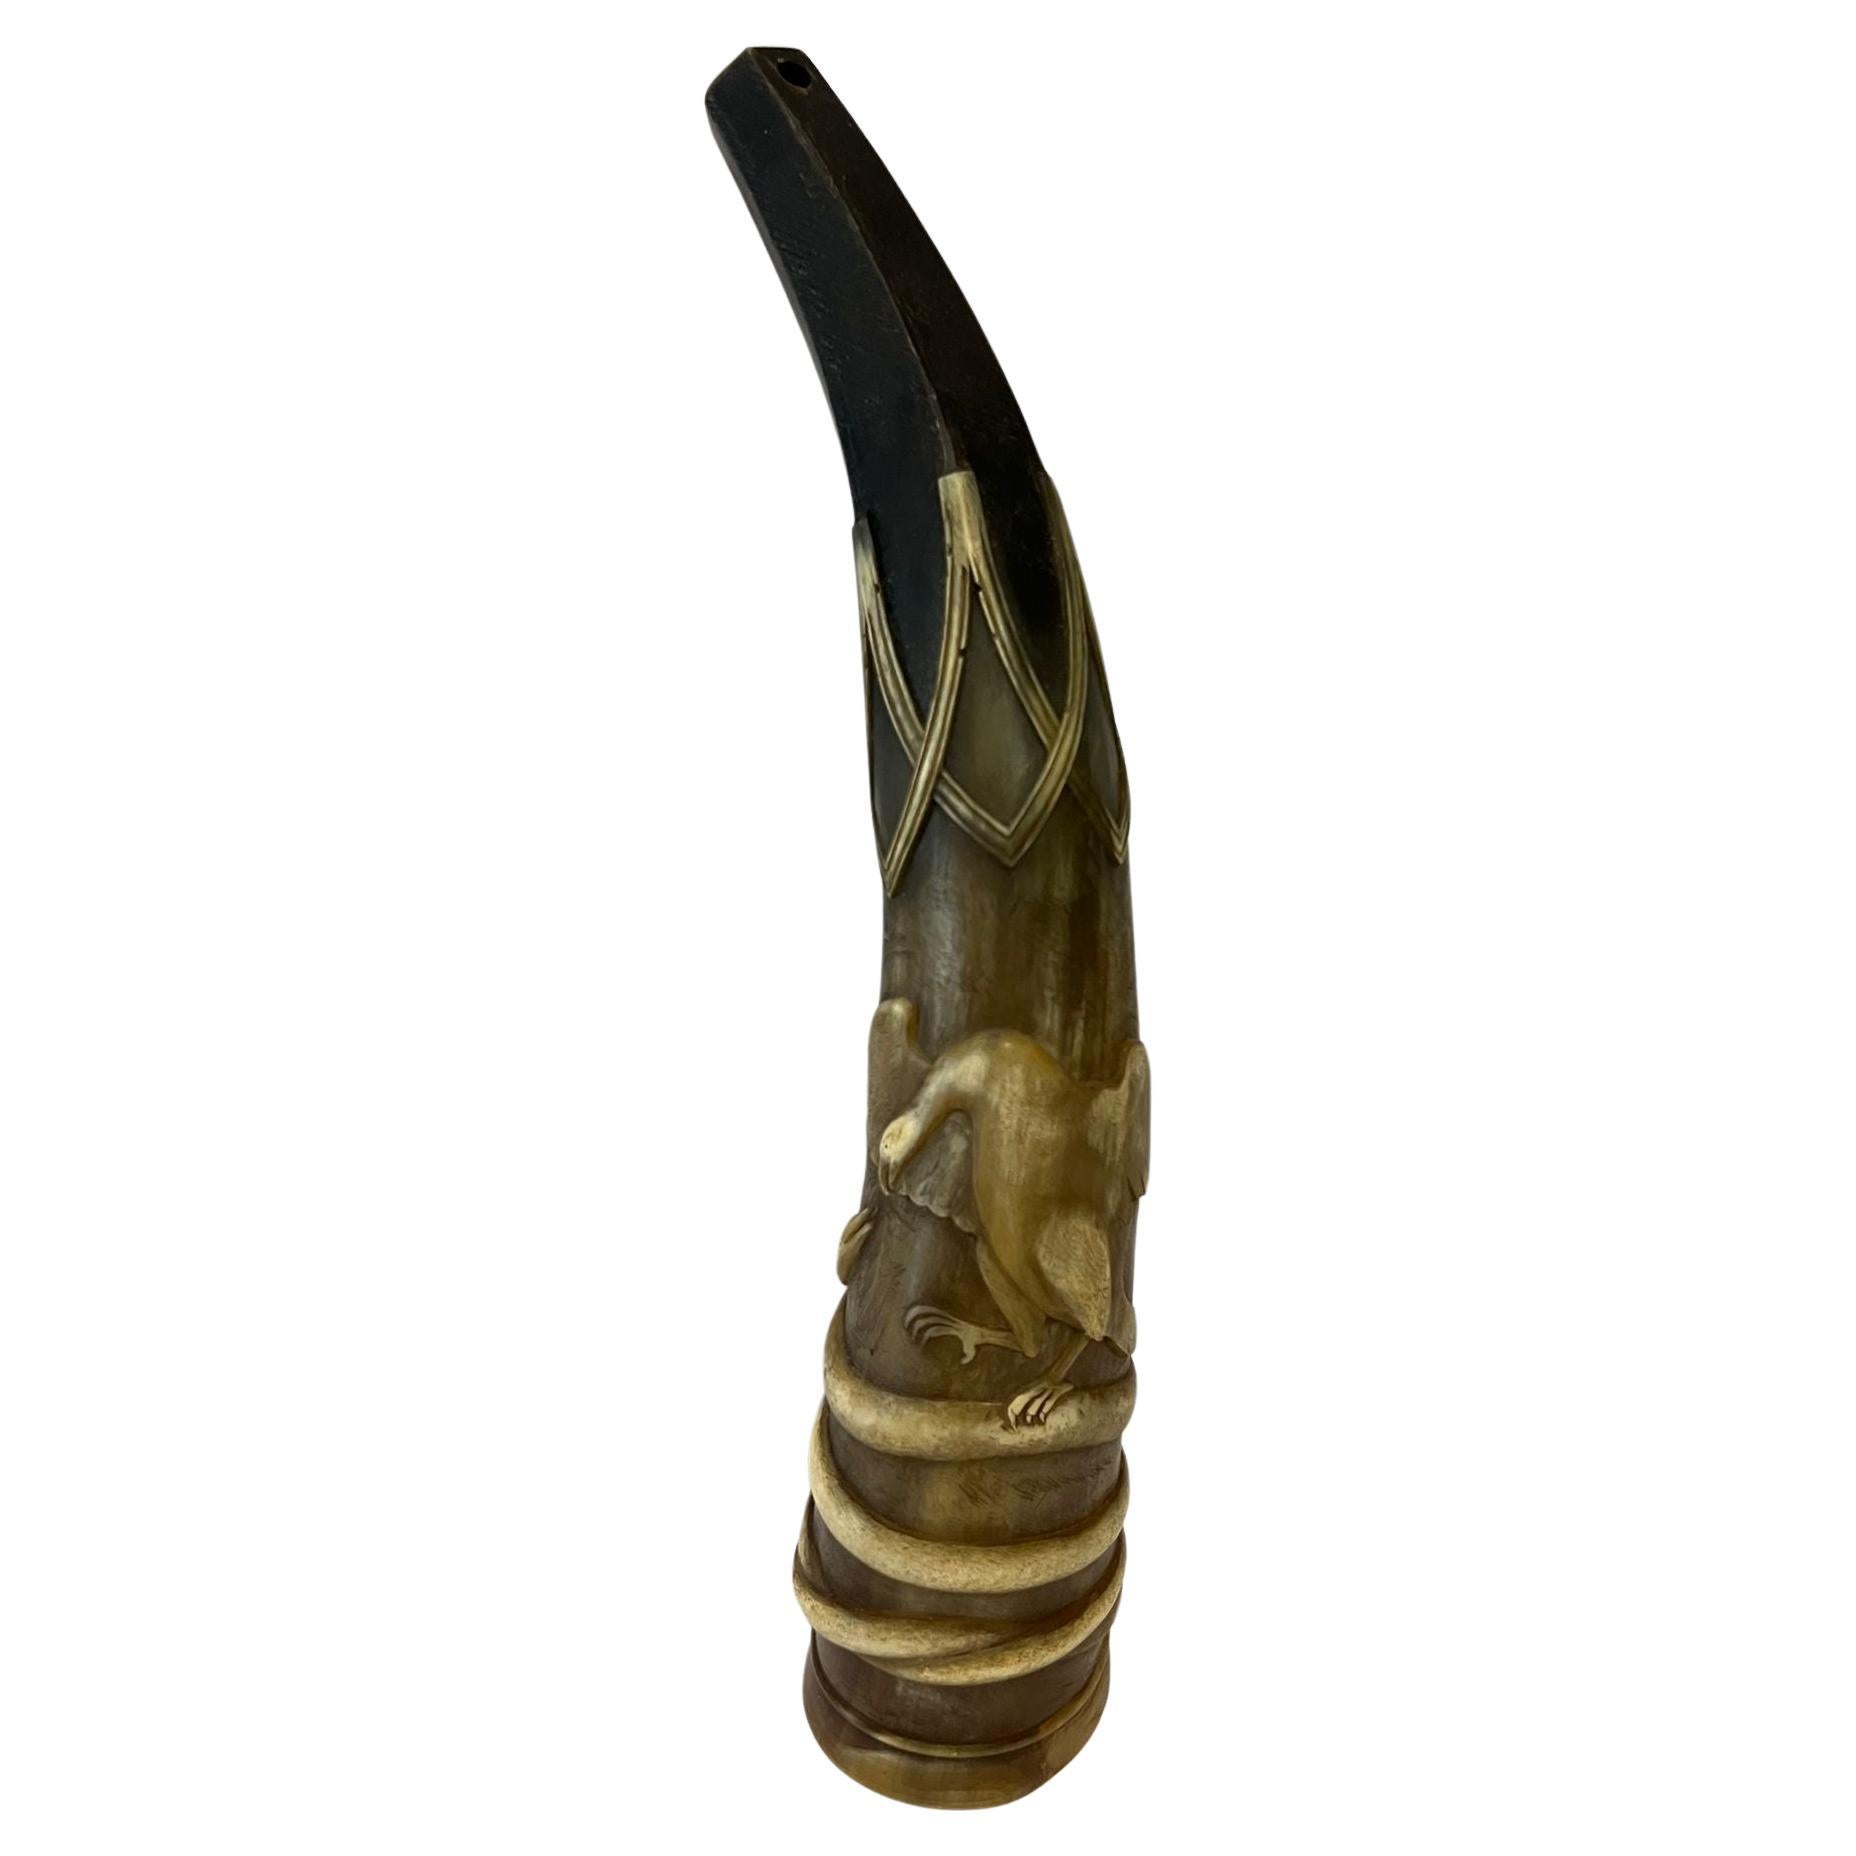 Antique carved drinking horn, from the 19th century, with engraved snake and eagle, good orginal condition